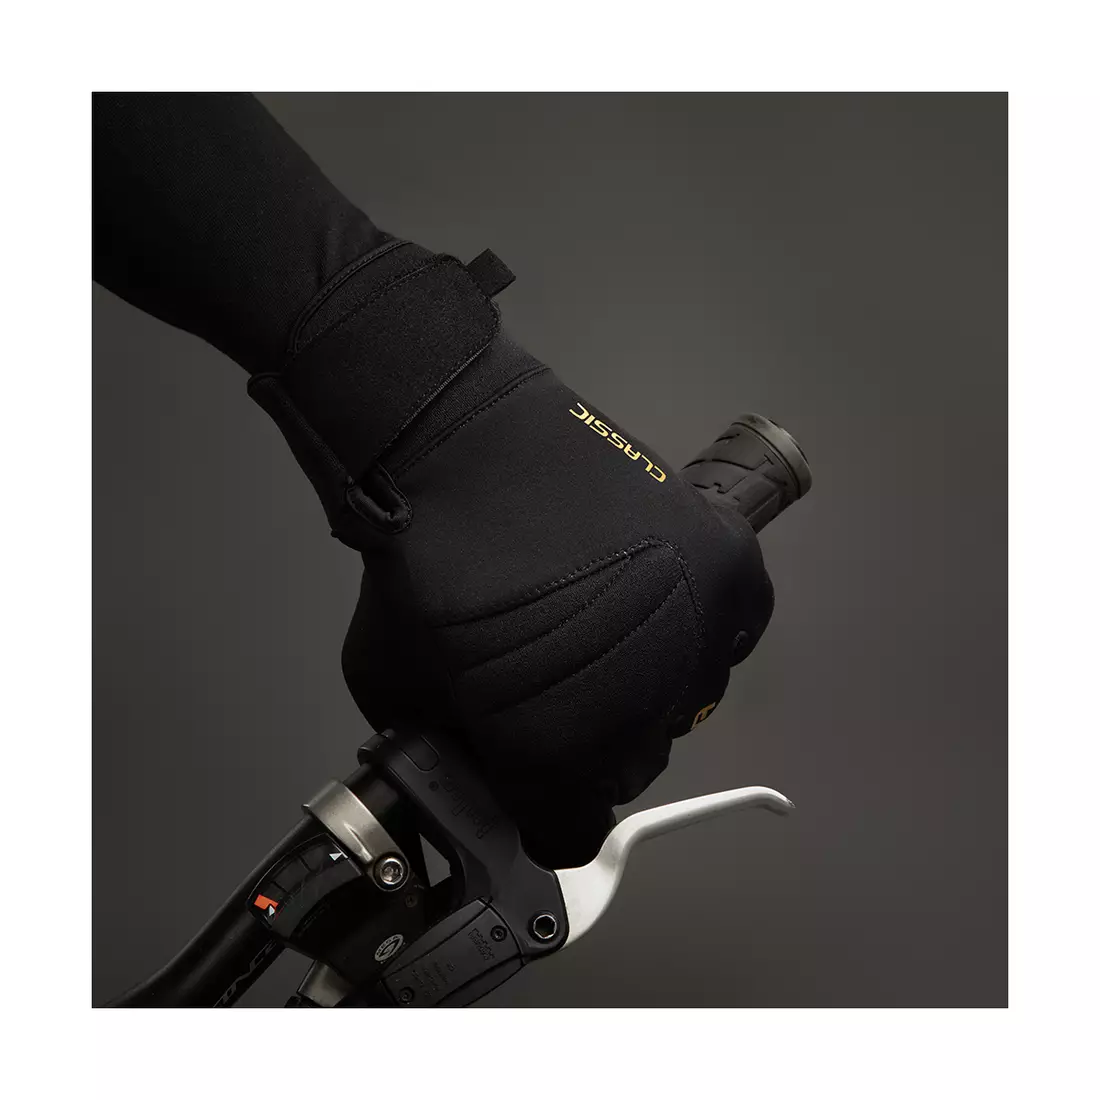 CHIBA CLASSIC warm winter bicycle gloves, black/gold